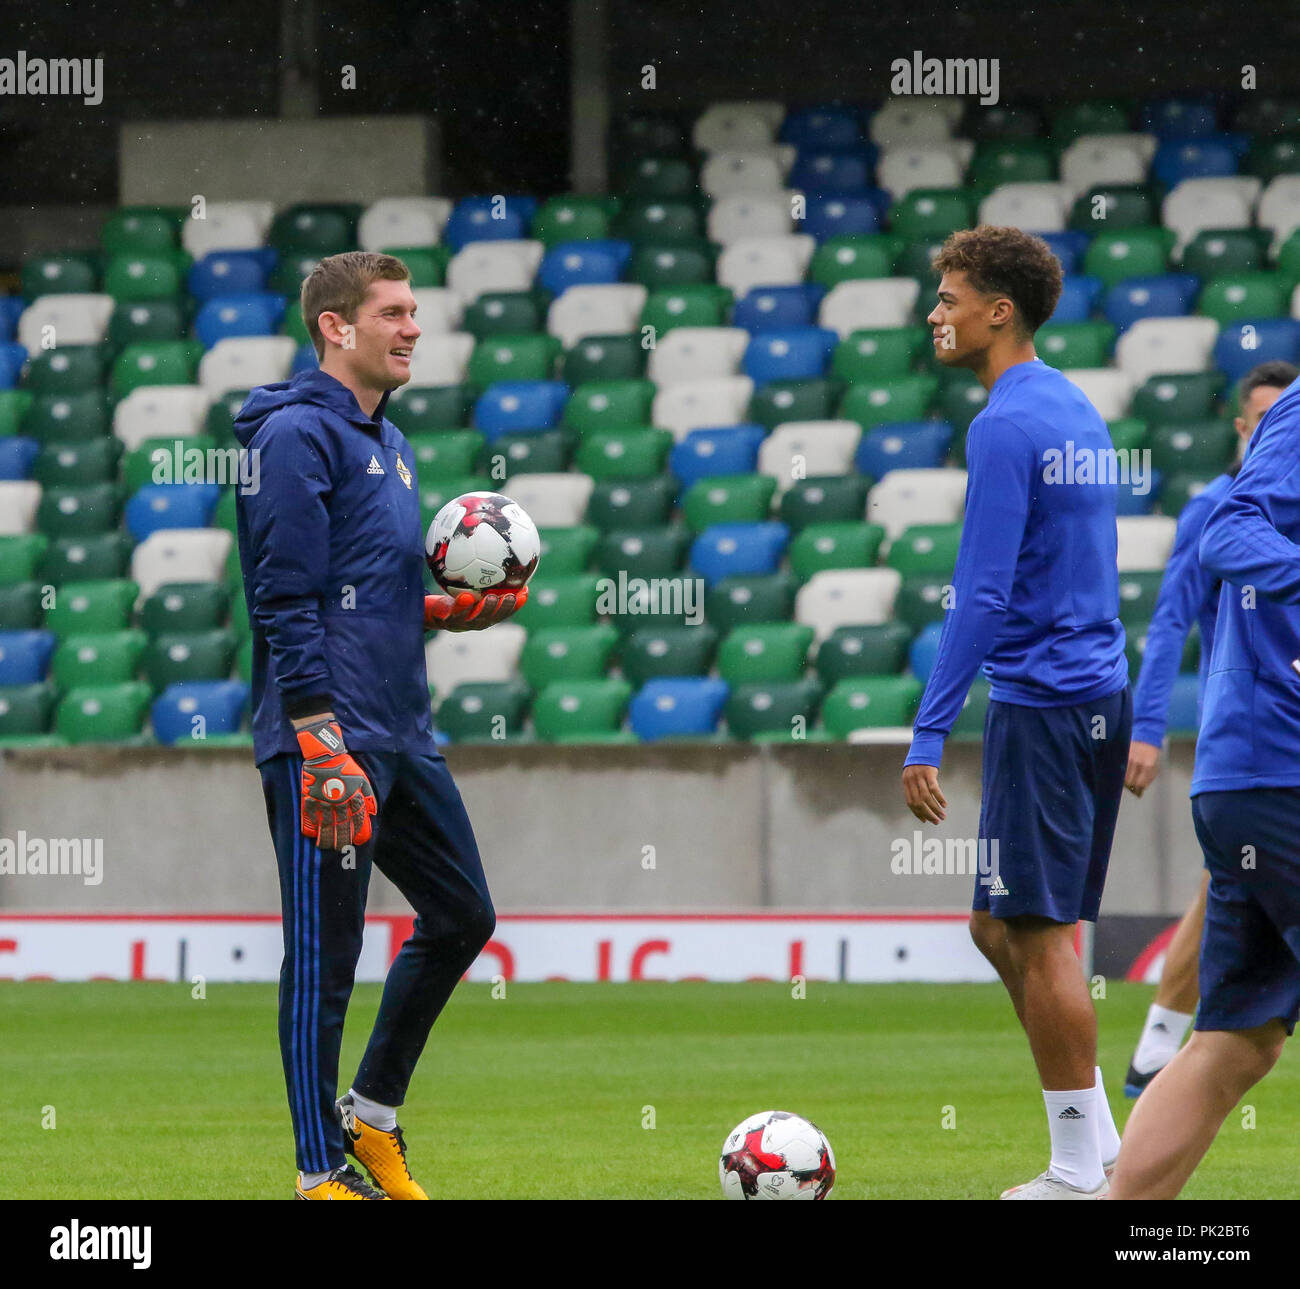 Windsor Park, Belfast, Northern Ireland. 10 September 2018. After Saturday's defeat in the UEFA Nations League, Northern Ireland returned to training this morning at Windsor Park. Tomorrow night they play Israel in a friendly international. Michael McGovern and Jamal Lewis (right). Credit: David Hunter/Alamy Live News. Stock Photo